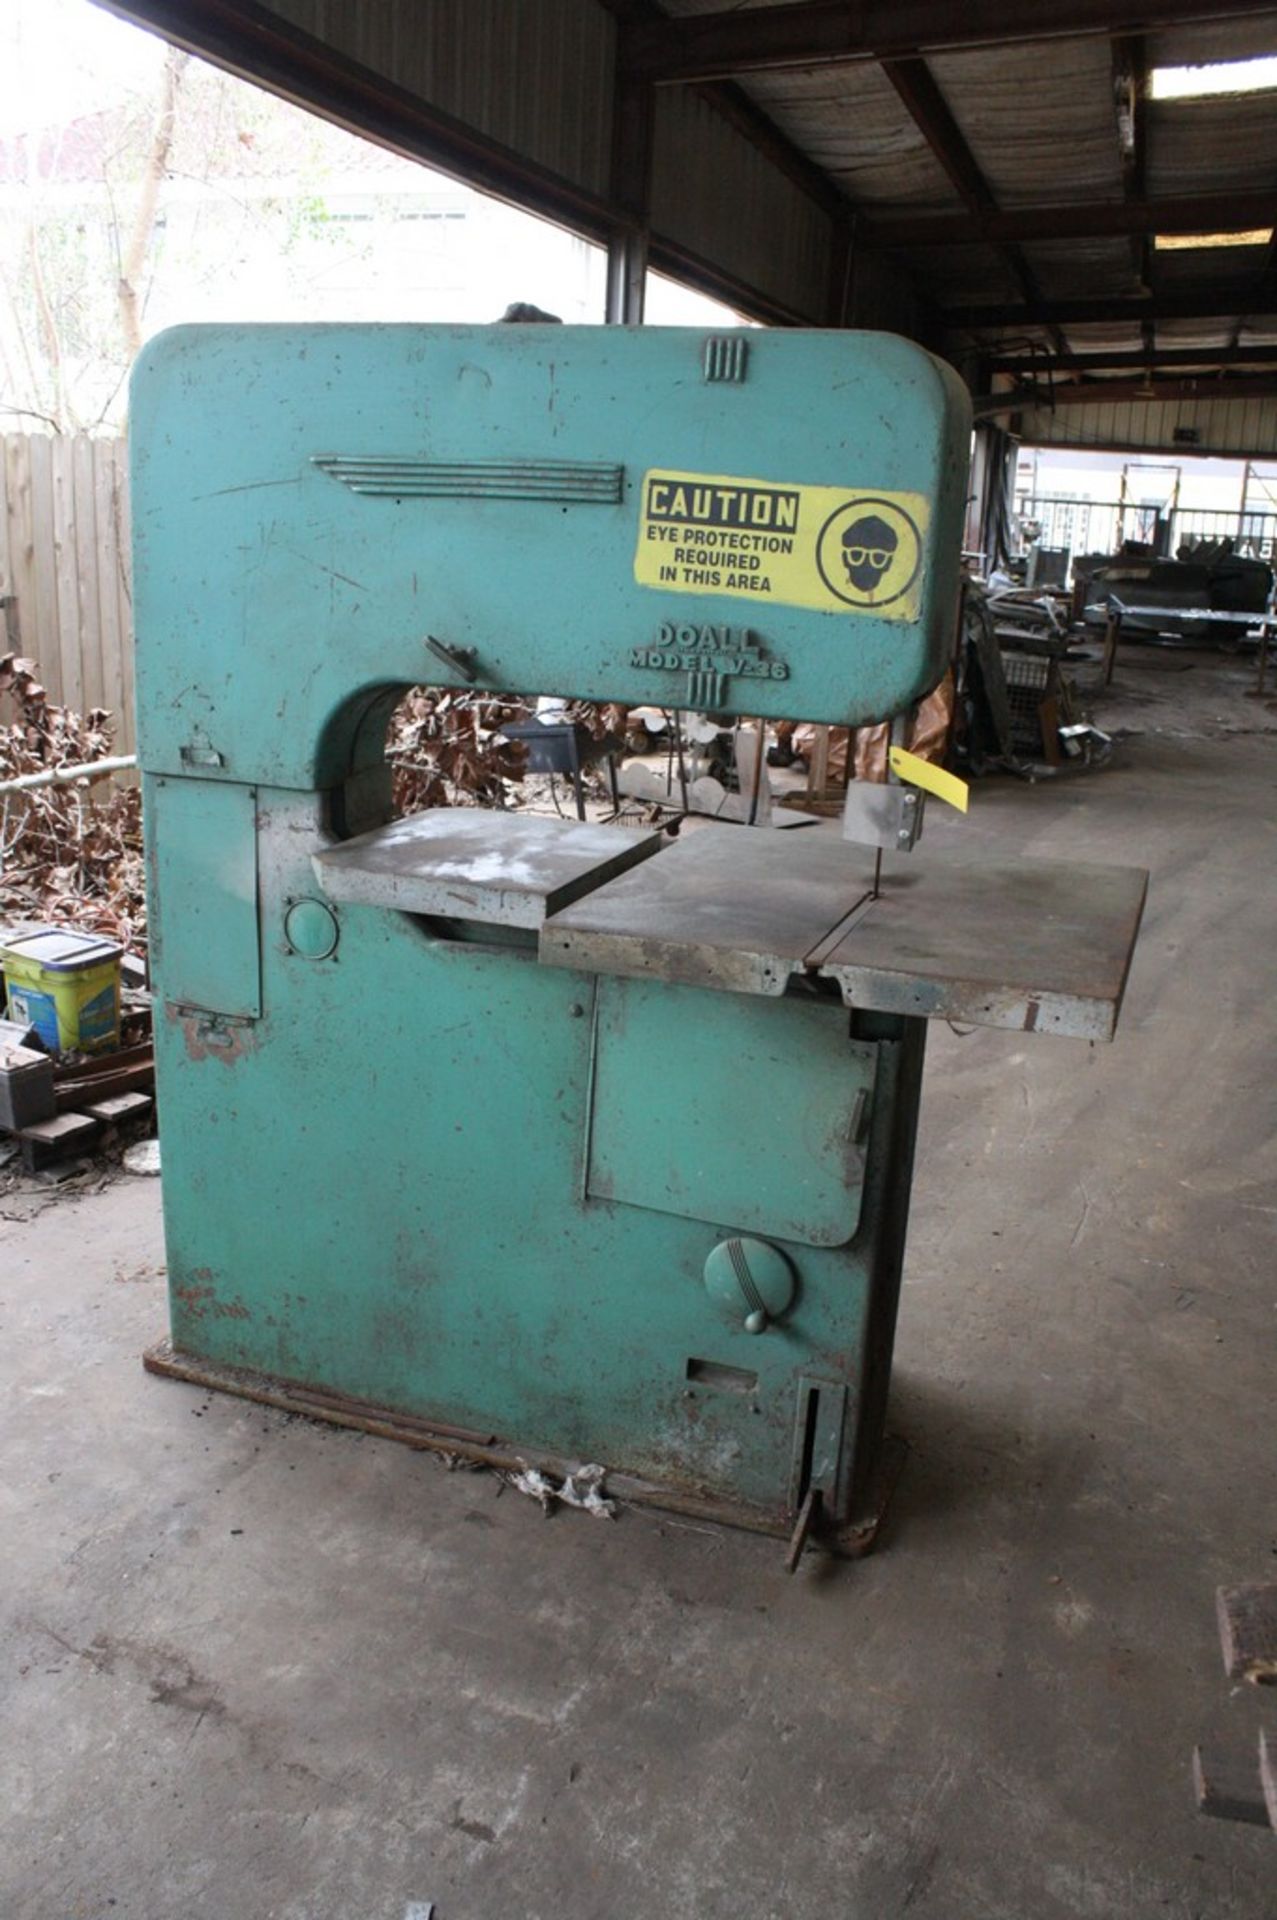 DO-ALL MODEL V36 36” VERTICAL METAL CUTTING BAND SAW 30.5” X 30.5” Tilting Work Table